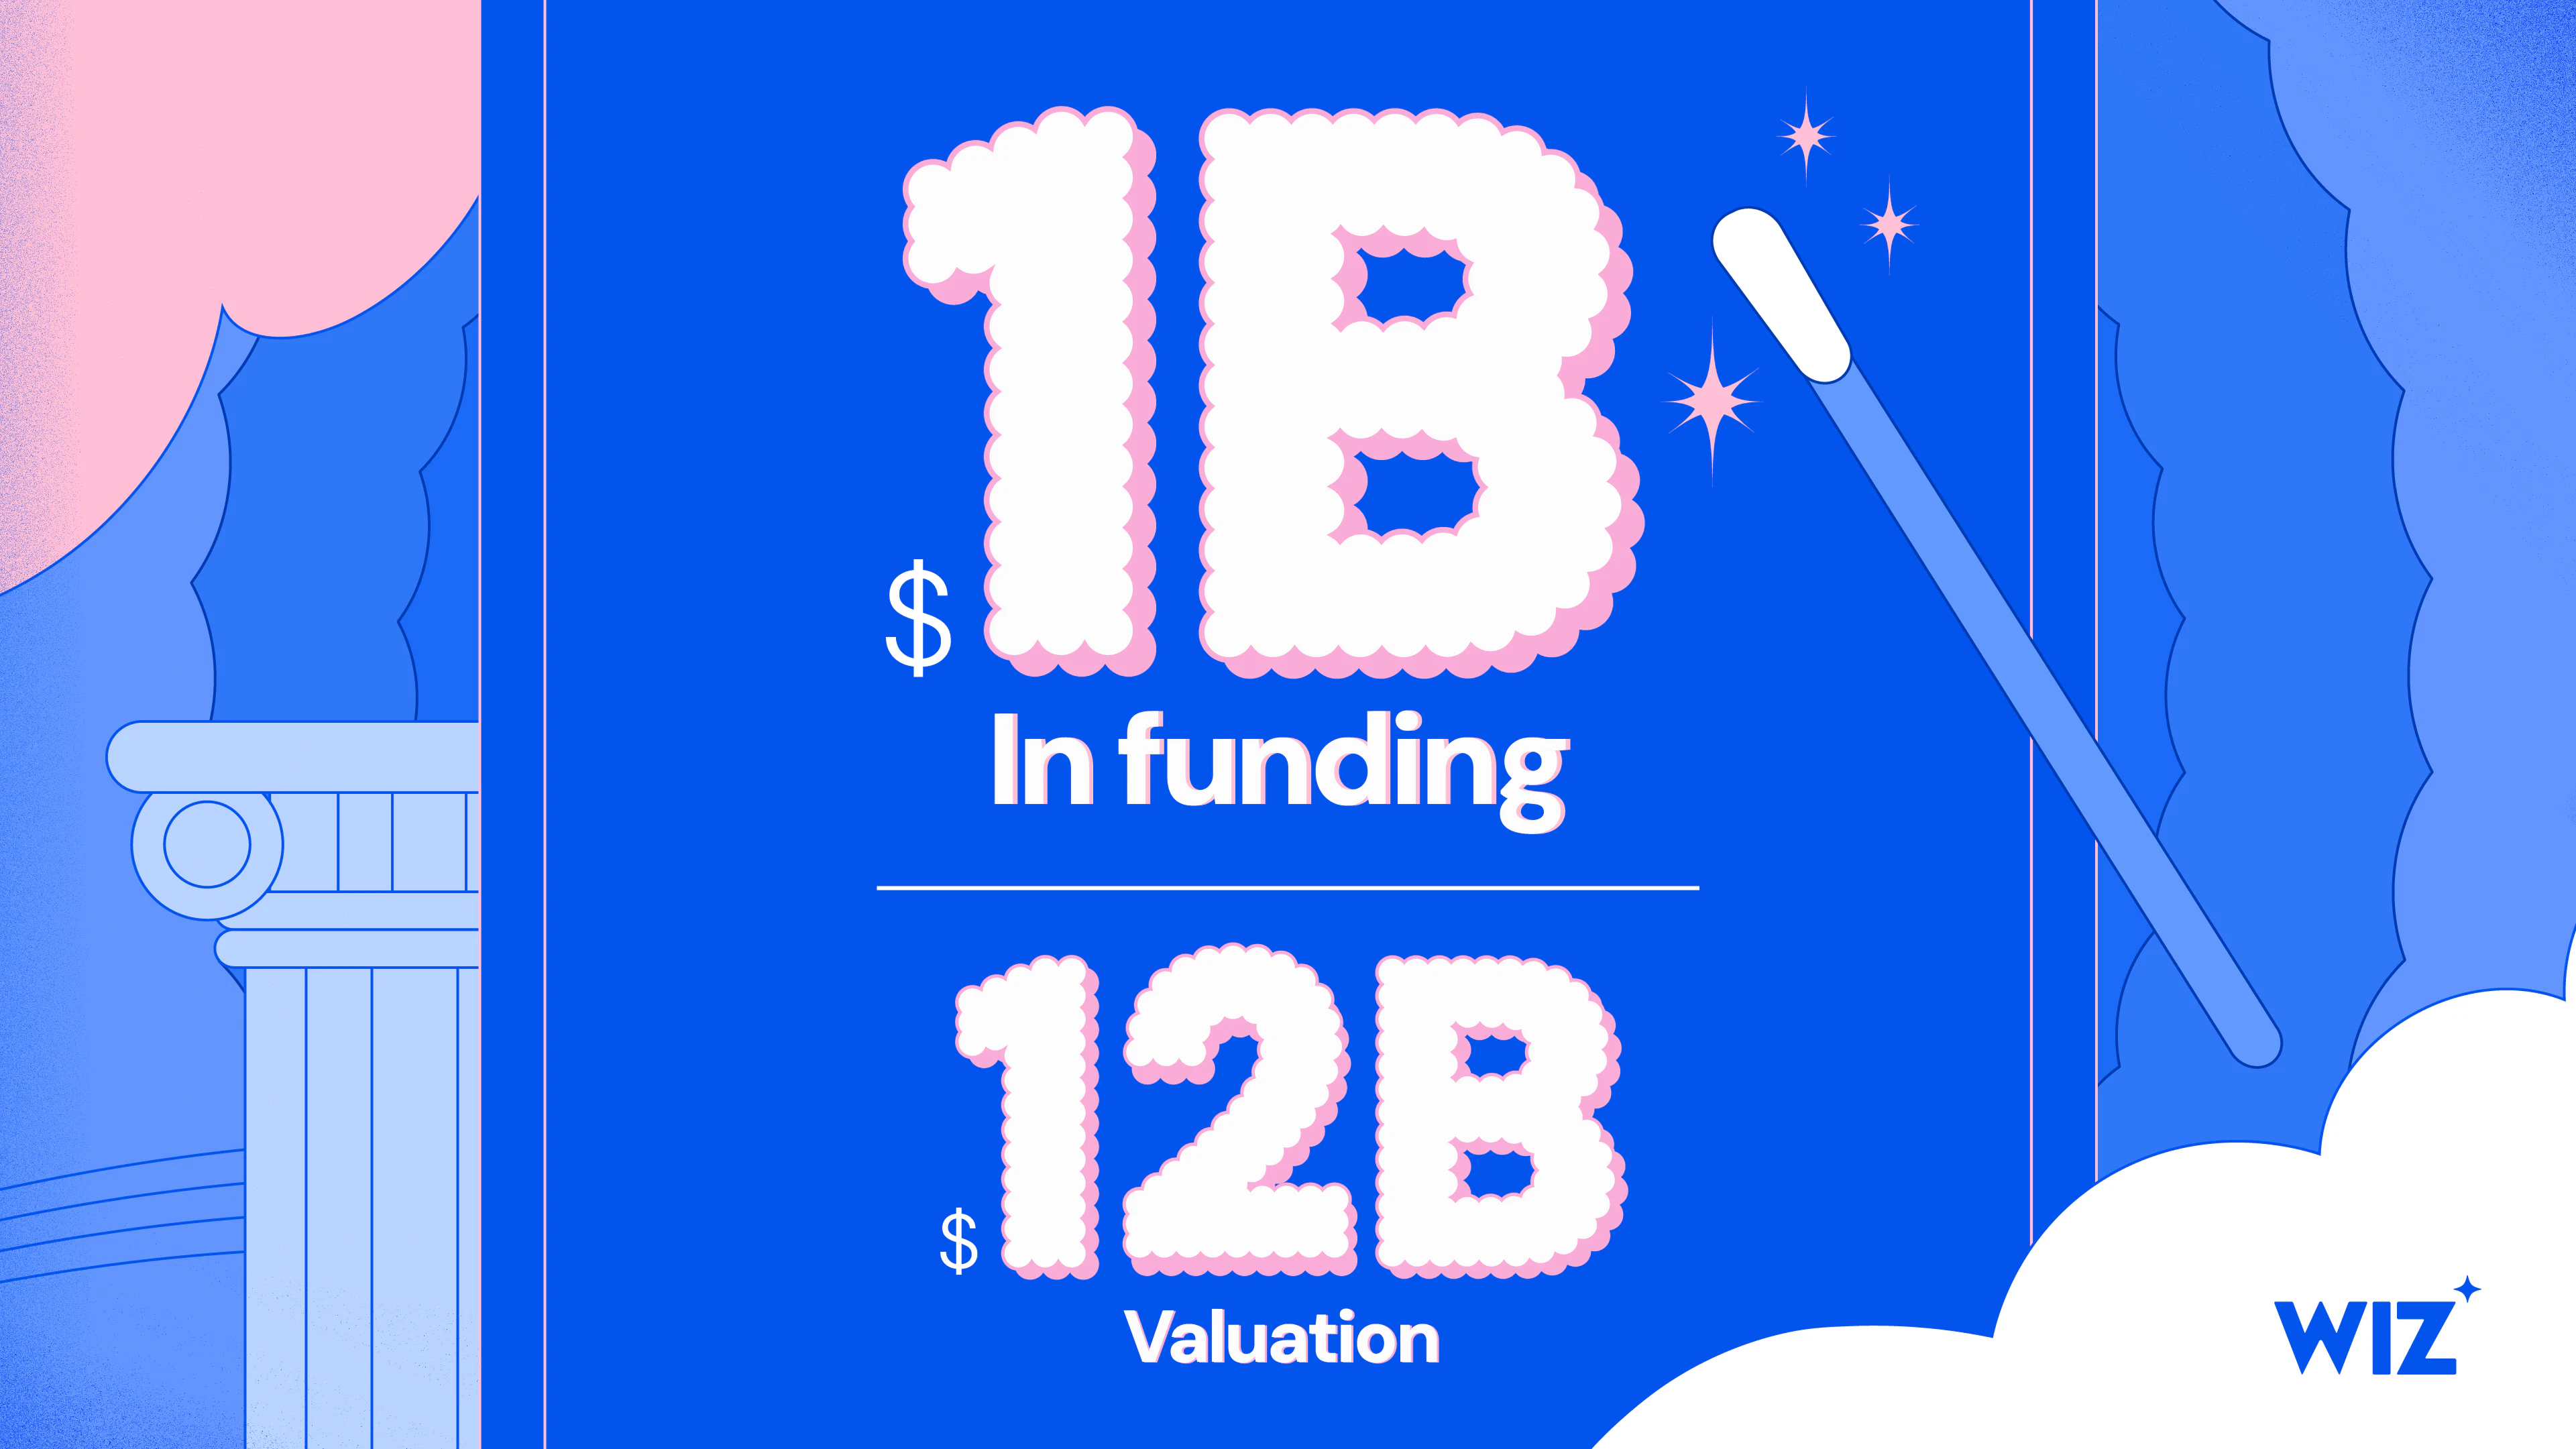 Today we’ve reached yet another milestone on our journey. Wiz has raised $1 billion at a $12 billion valuation, led by Andreessen Horowitz, Lightspe